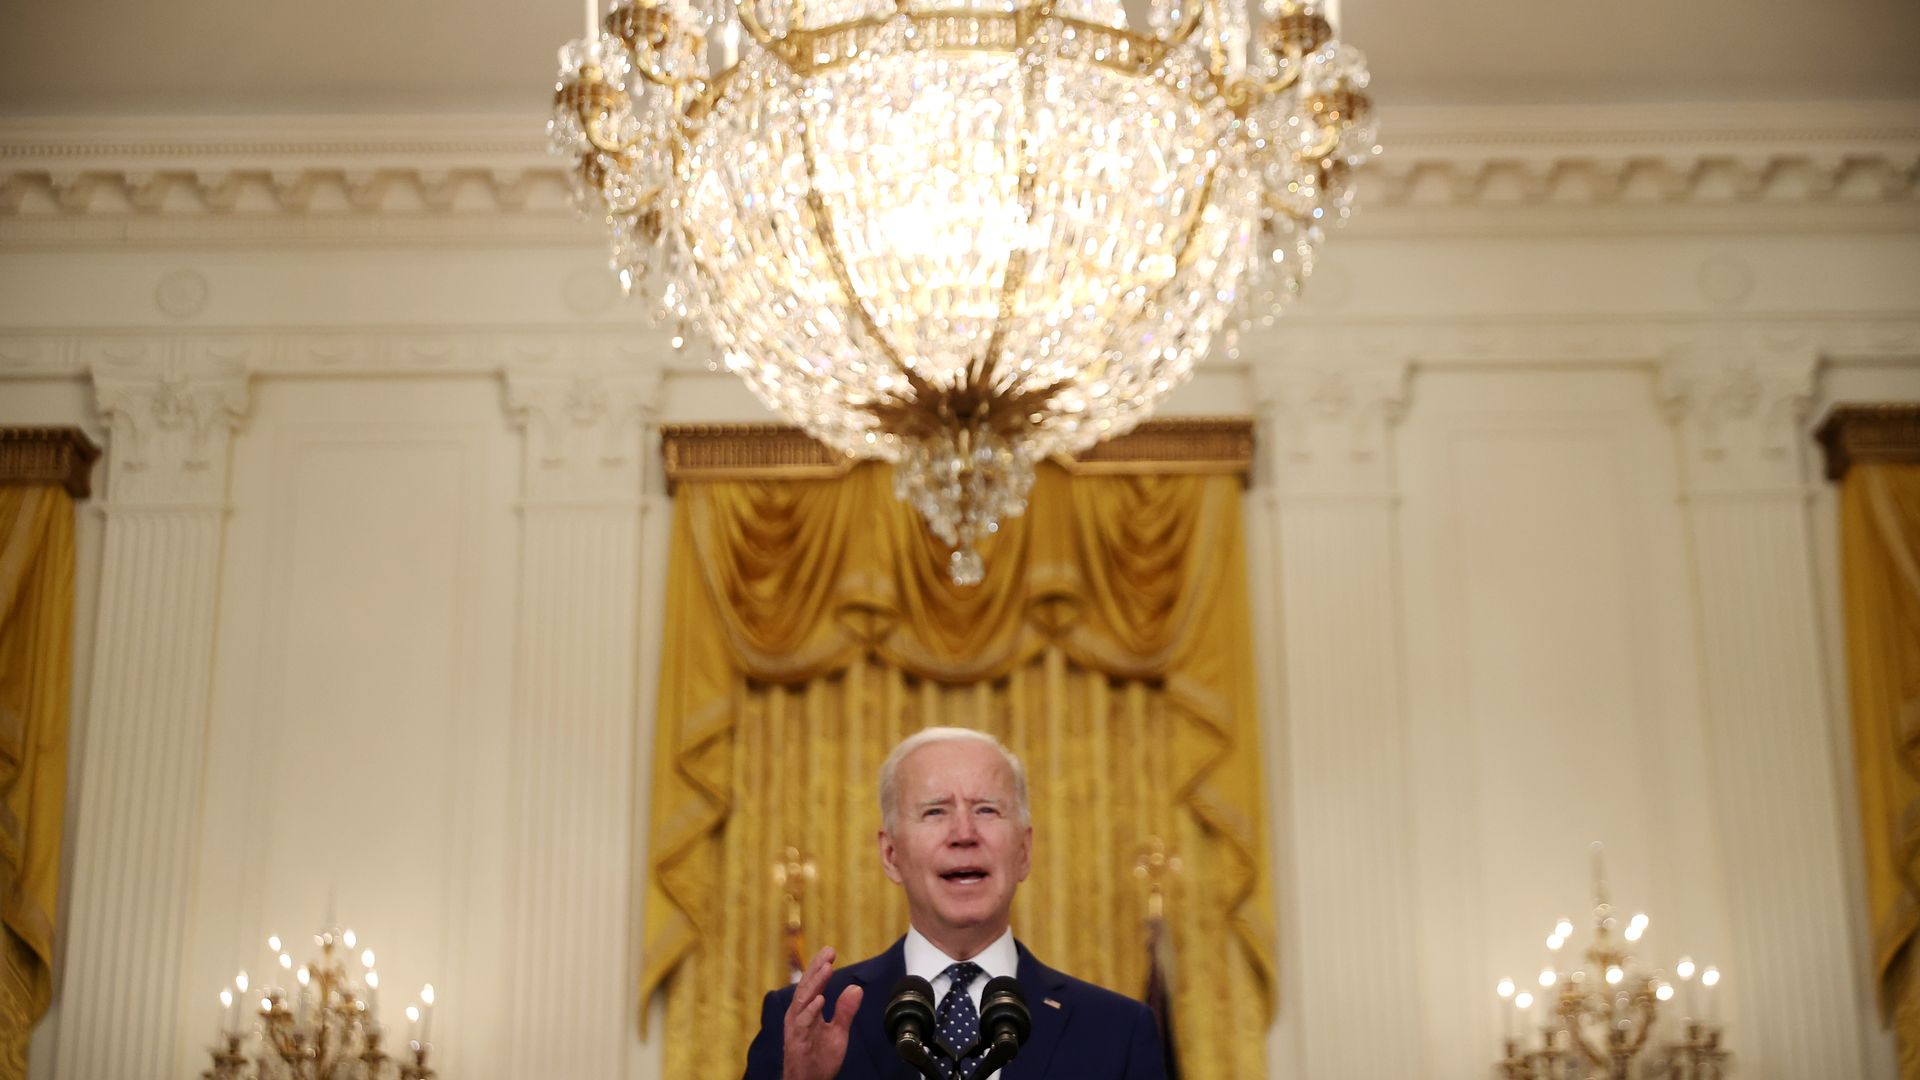 President Biden is seen delivering remarks about Russia.